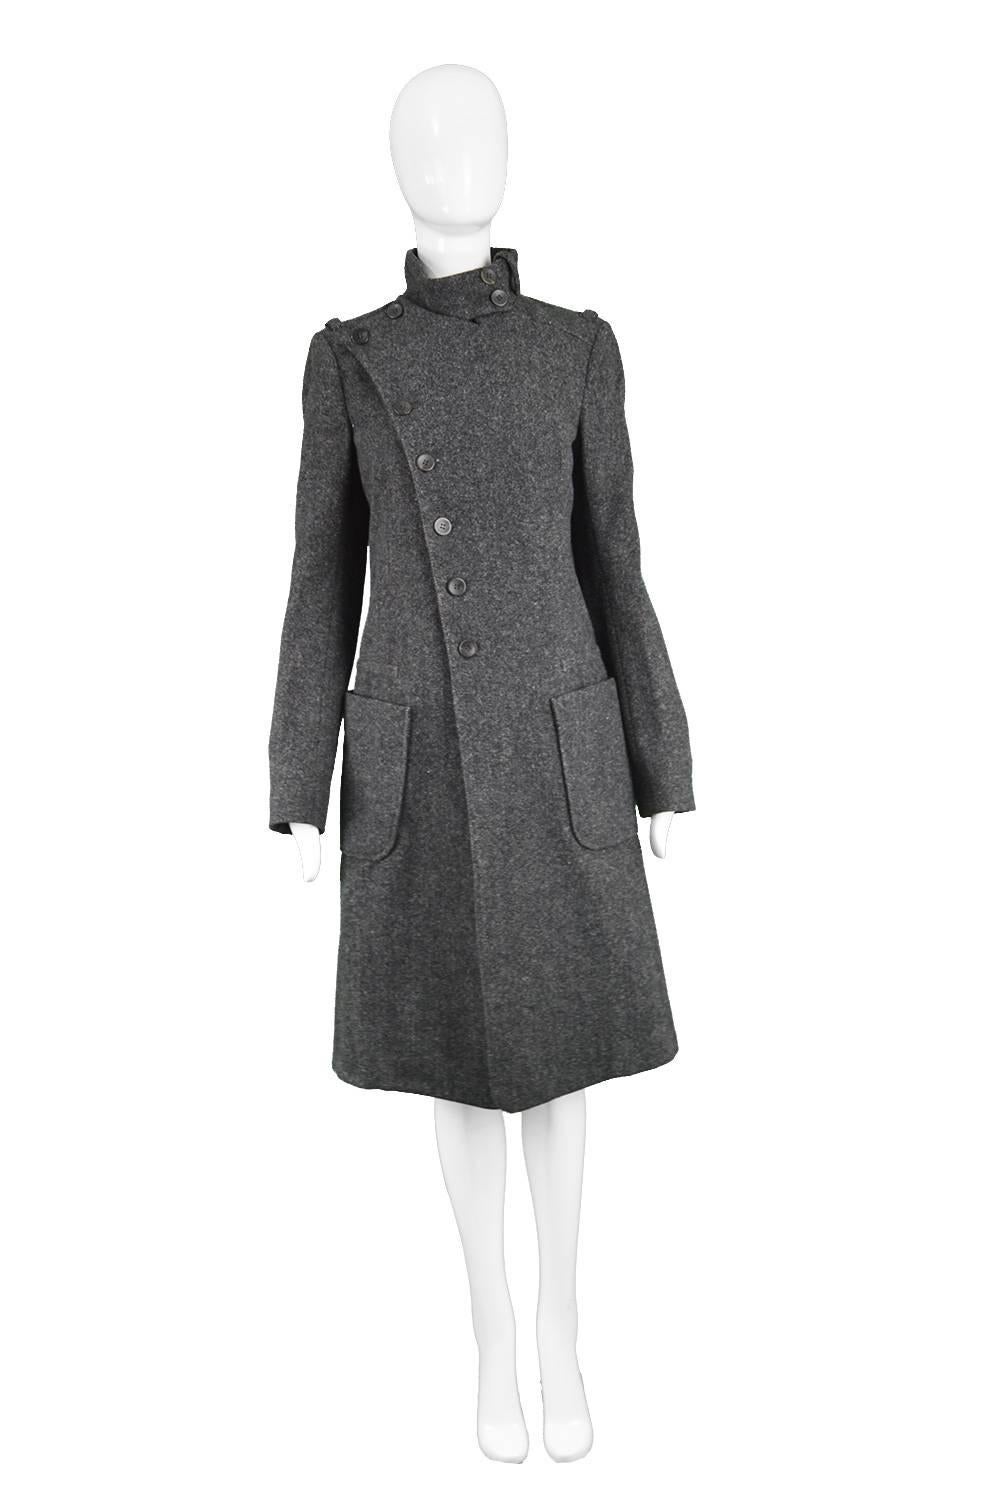 Balenciaga by Nicolas Ghesquiere Gray Wool & Cashmere Military Style Coat 

Size: Marked 38 which is roughly a UK 10/ US 6. Please check measurements.
Bust - 36” / 91cm (allow a couple of inches room for movement)
Waist - 34” / 86cm
Hips - 40” /